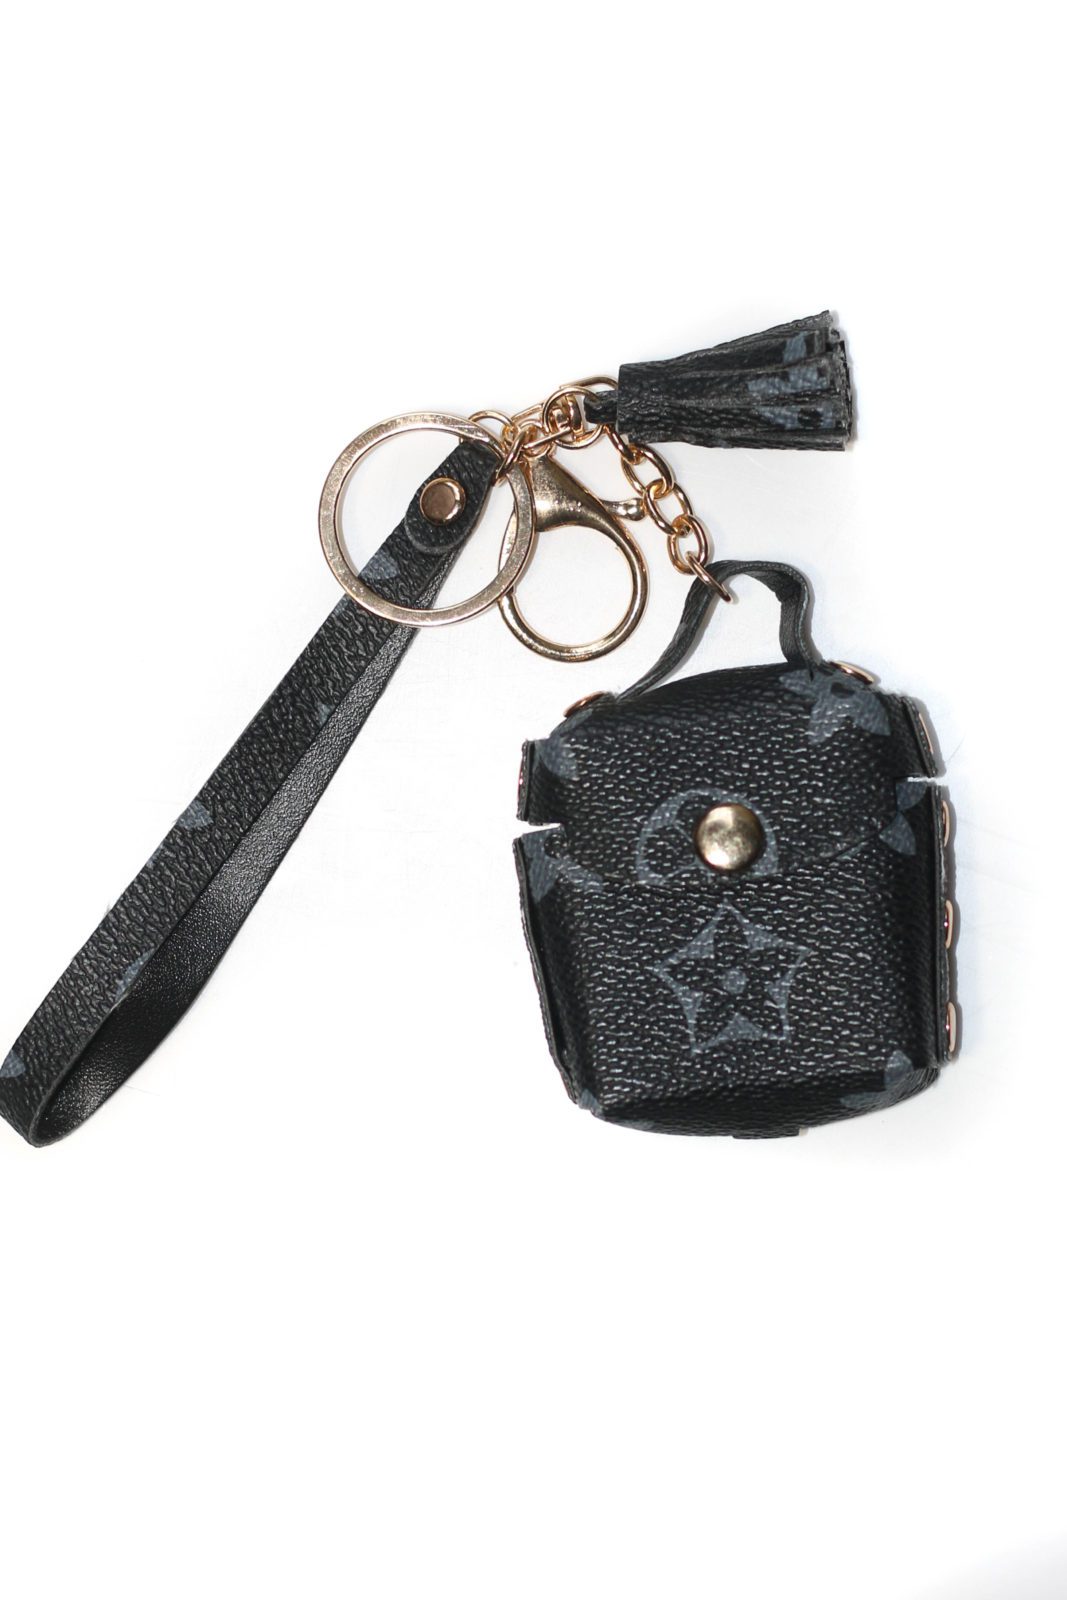 Black Fashion keychain leather with airpod case - Creo Piece